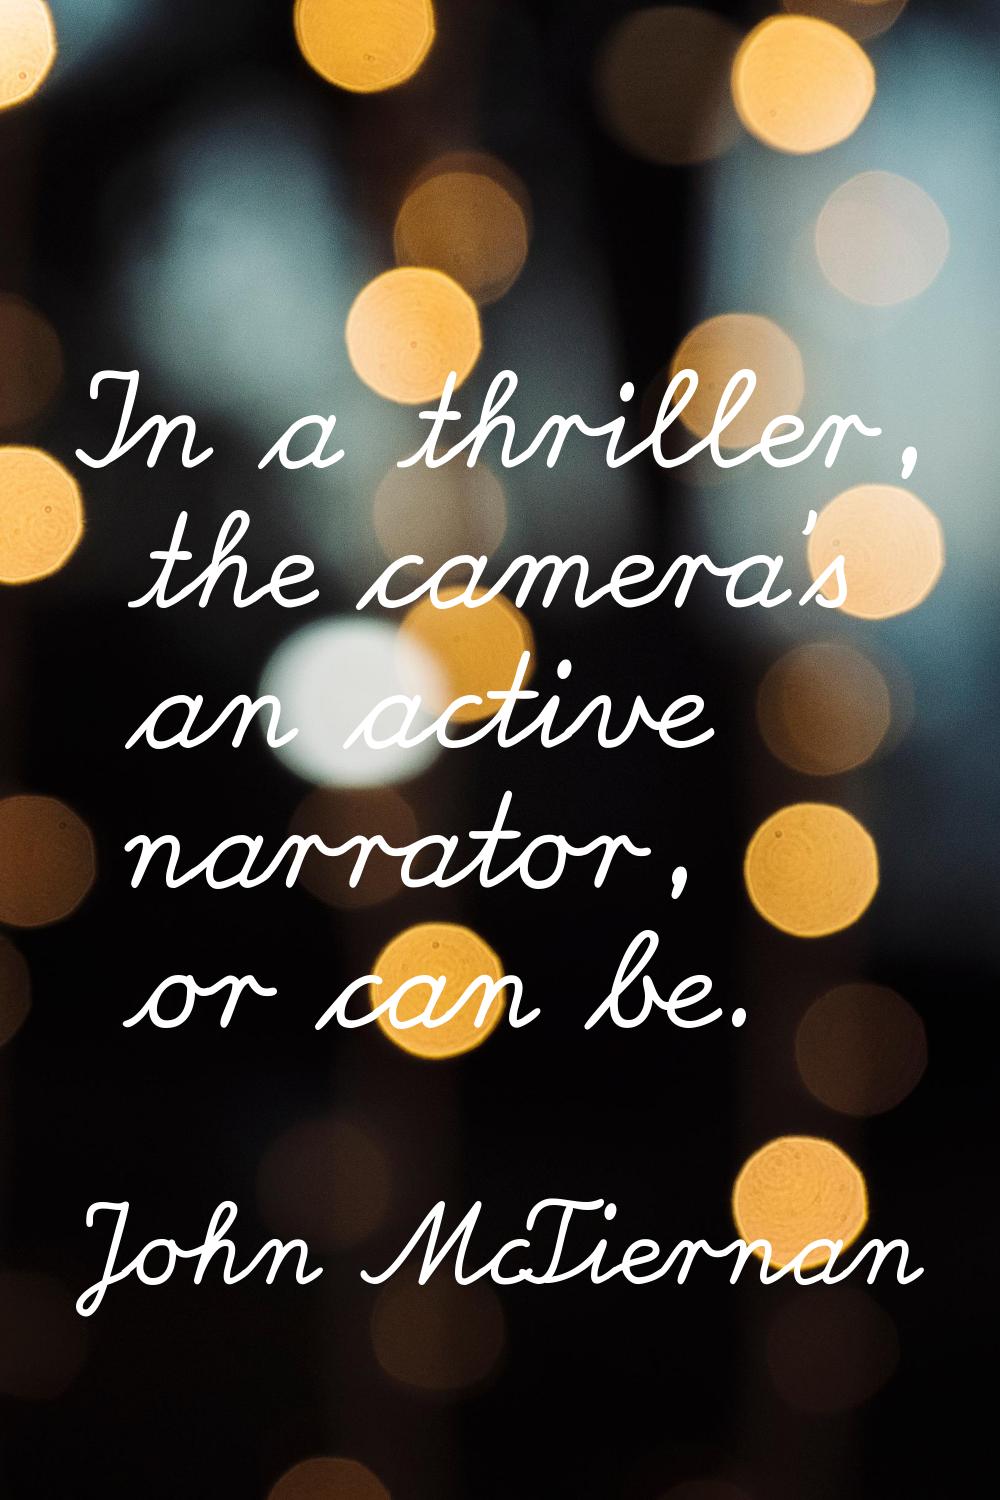 In a thriller, the camera's an active narrator, or can be.